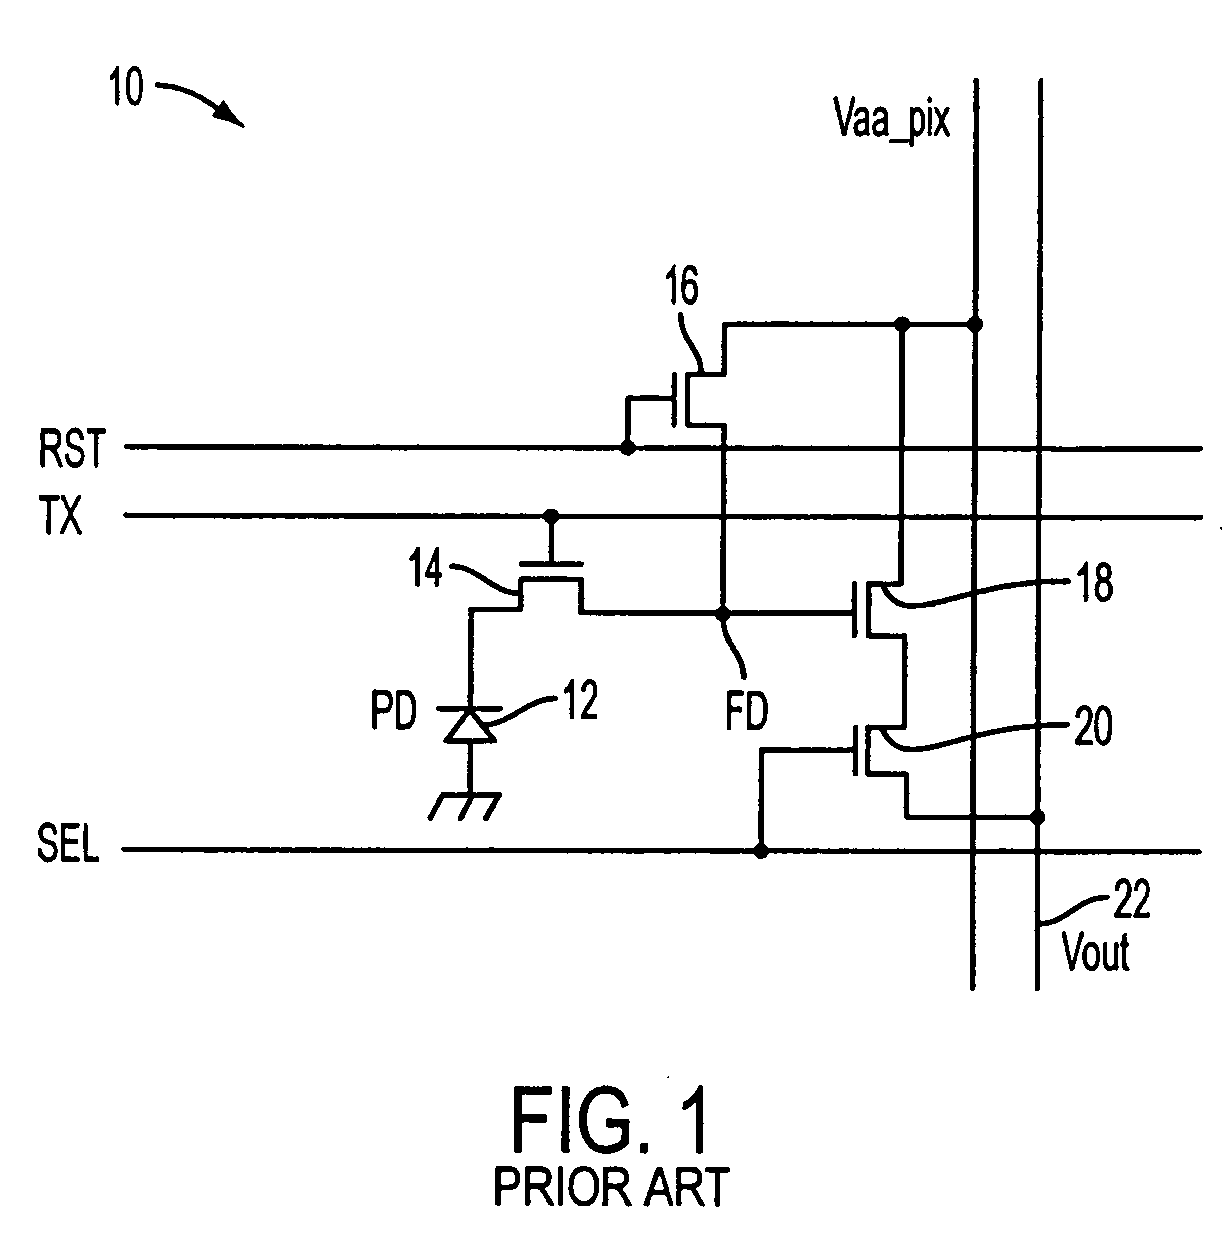 Dual conversion gain pixel using Schottky and ohmic contacts to the floating diffusion region and methods of fabrication and operation